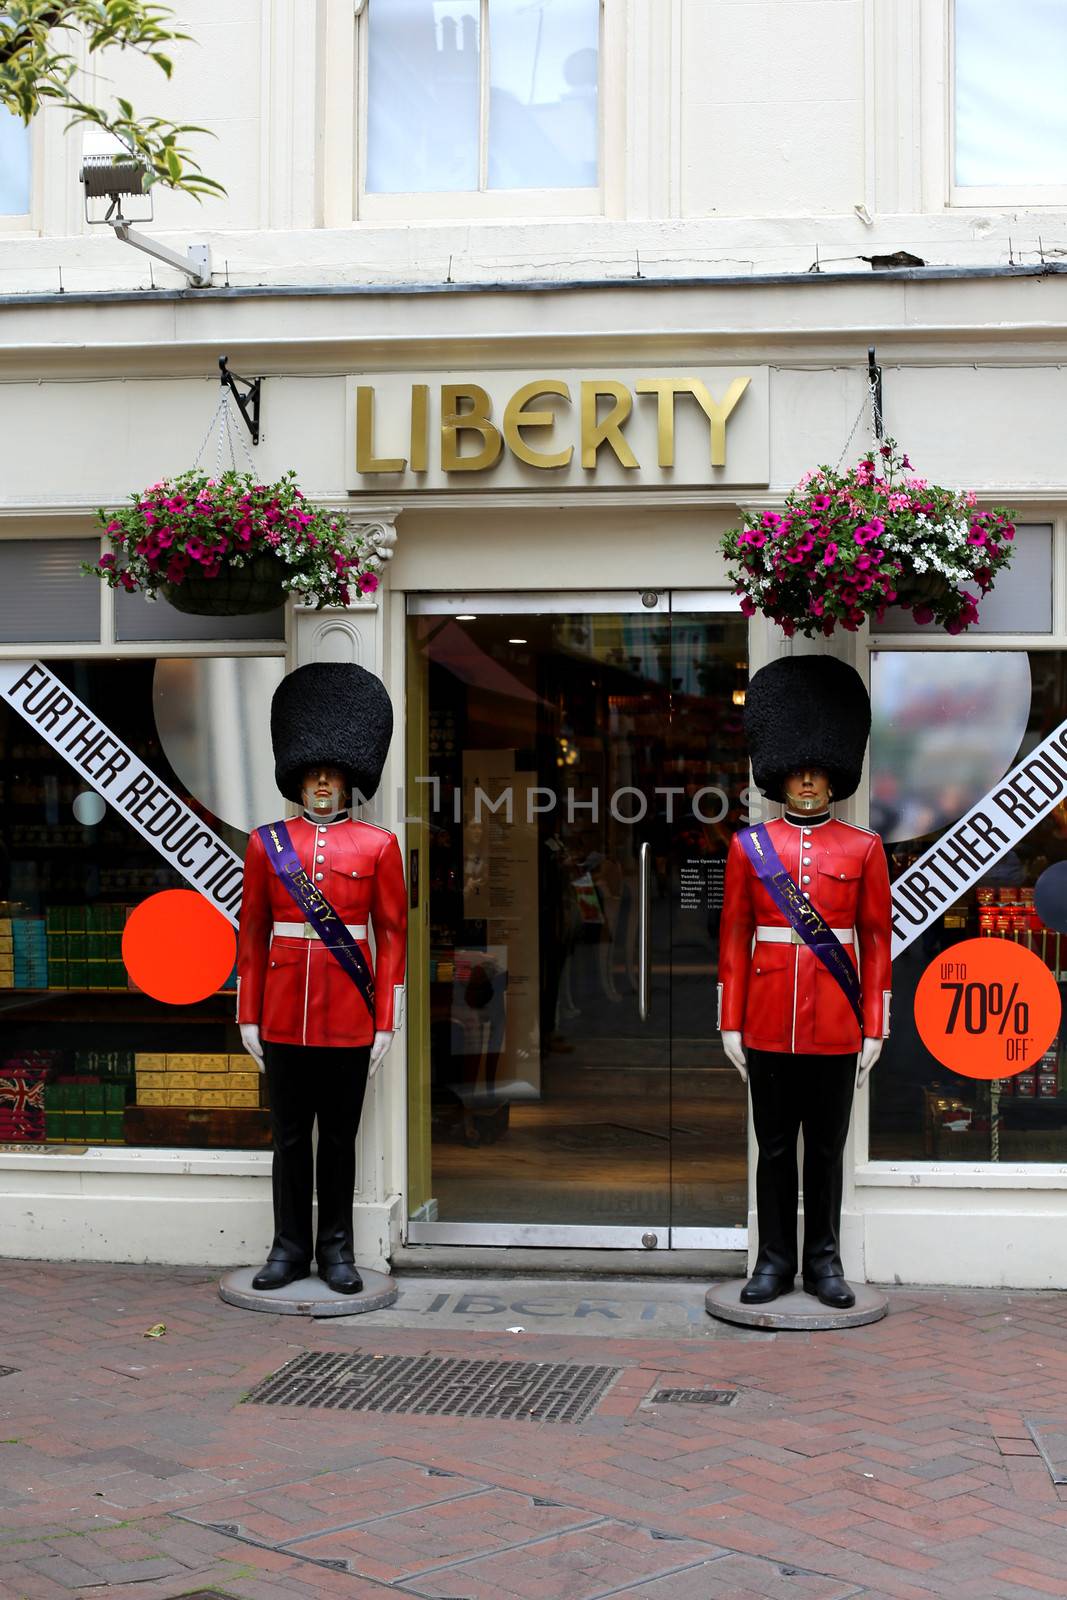 Liberty Department Store Carnaby Street London by Whiteboxmedia